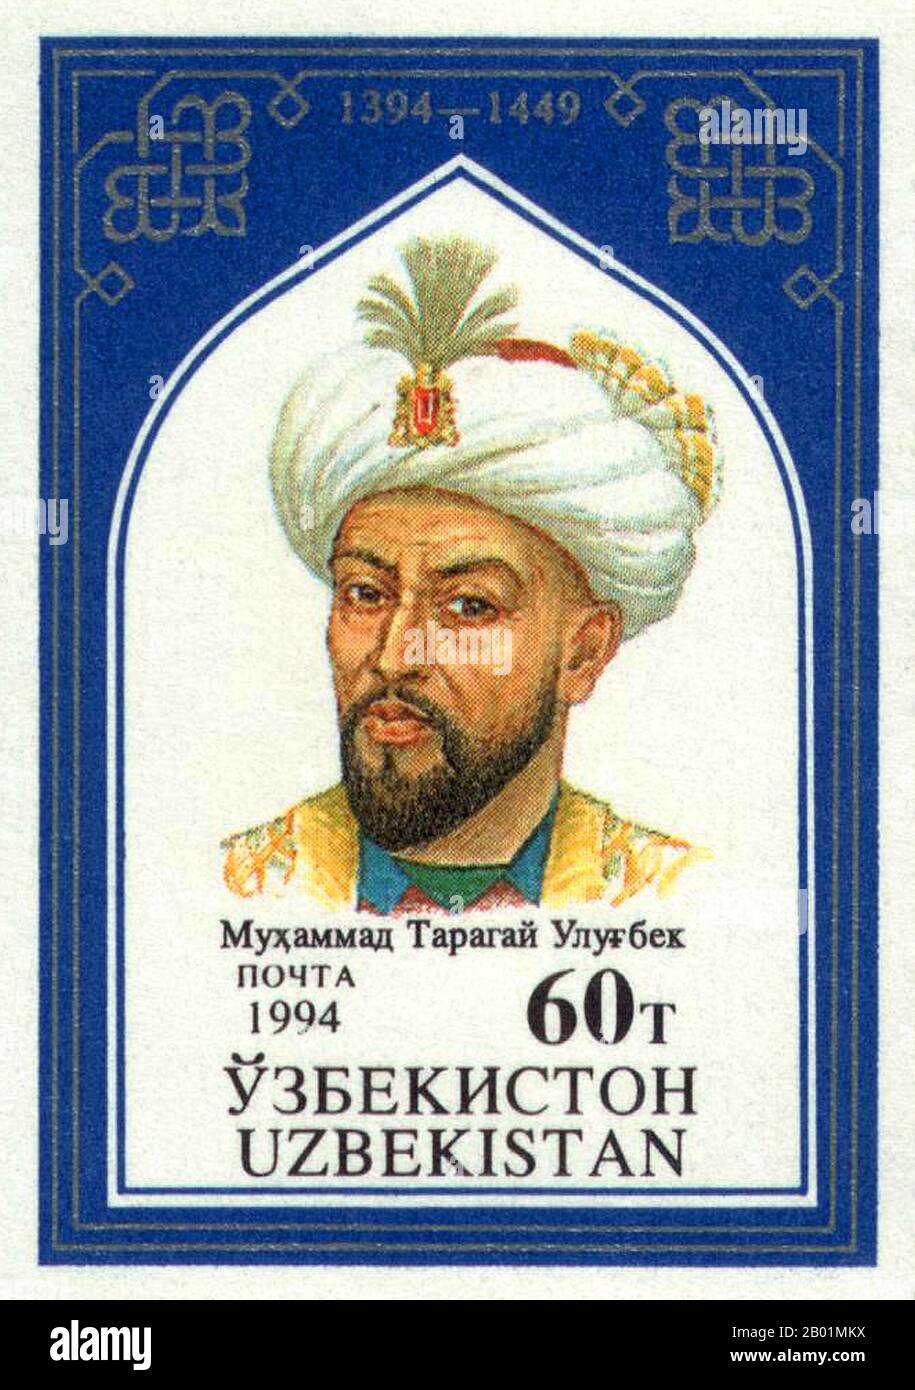 Iran/Uzbekistan: Uzbek postage stamp of Ulugh Beg (22 March 1394 - 27 October 1449). Issued on the 600th anniversary of Ulugh Beg's birth, 1994.  Ulugh Bek was a Timurid ruler as well as an astronomer, mathematician and sultan. His commonly-known name is not truly a personal name, but can be loosely translated as 'Great Ruler'  and was the Turkic equivalent of Timur's Perso-Arabic title Amīr-e Kabīr. His real name was Mīrzā Mohammad Tāraghay bin Shāhrokh. Ulugh Beg was notable for his work in astronomy-related mathematics, such as trigonometry and spherical geometry. Stock Photo